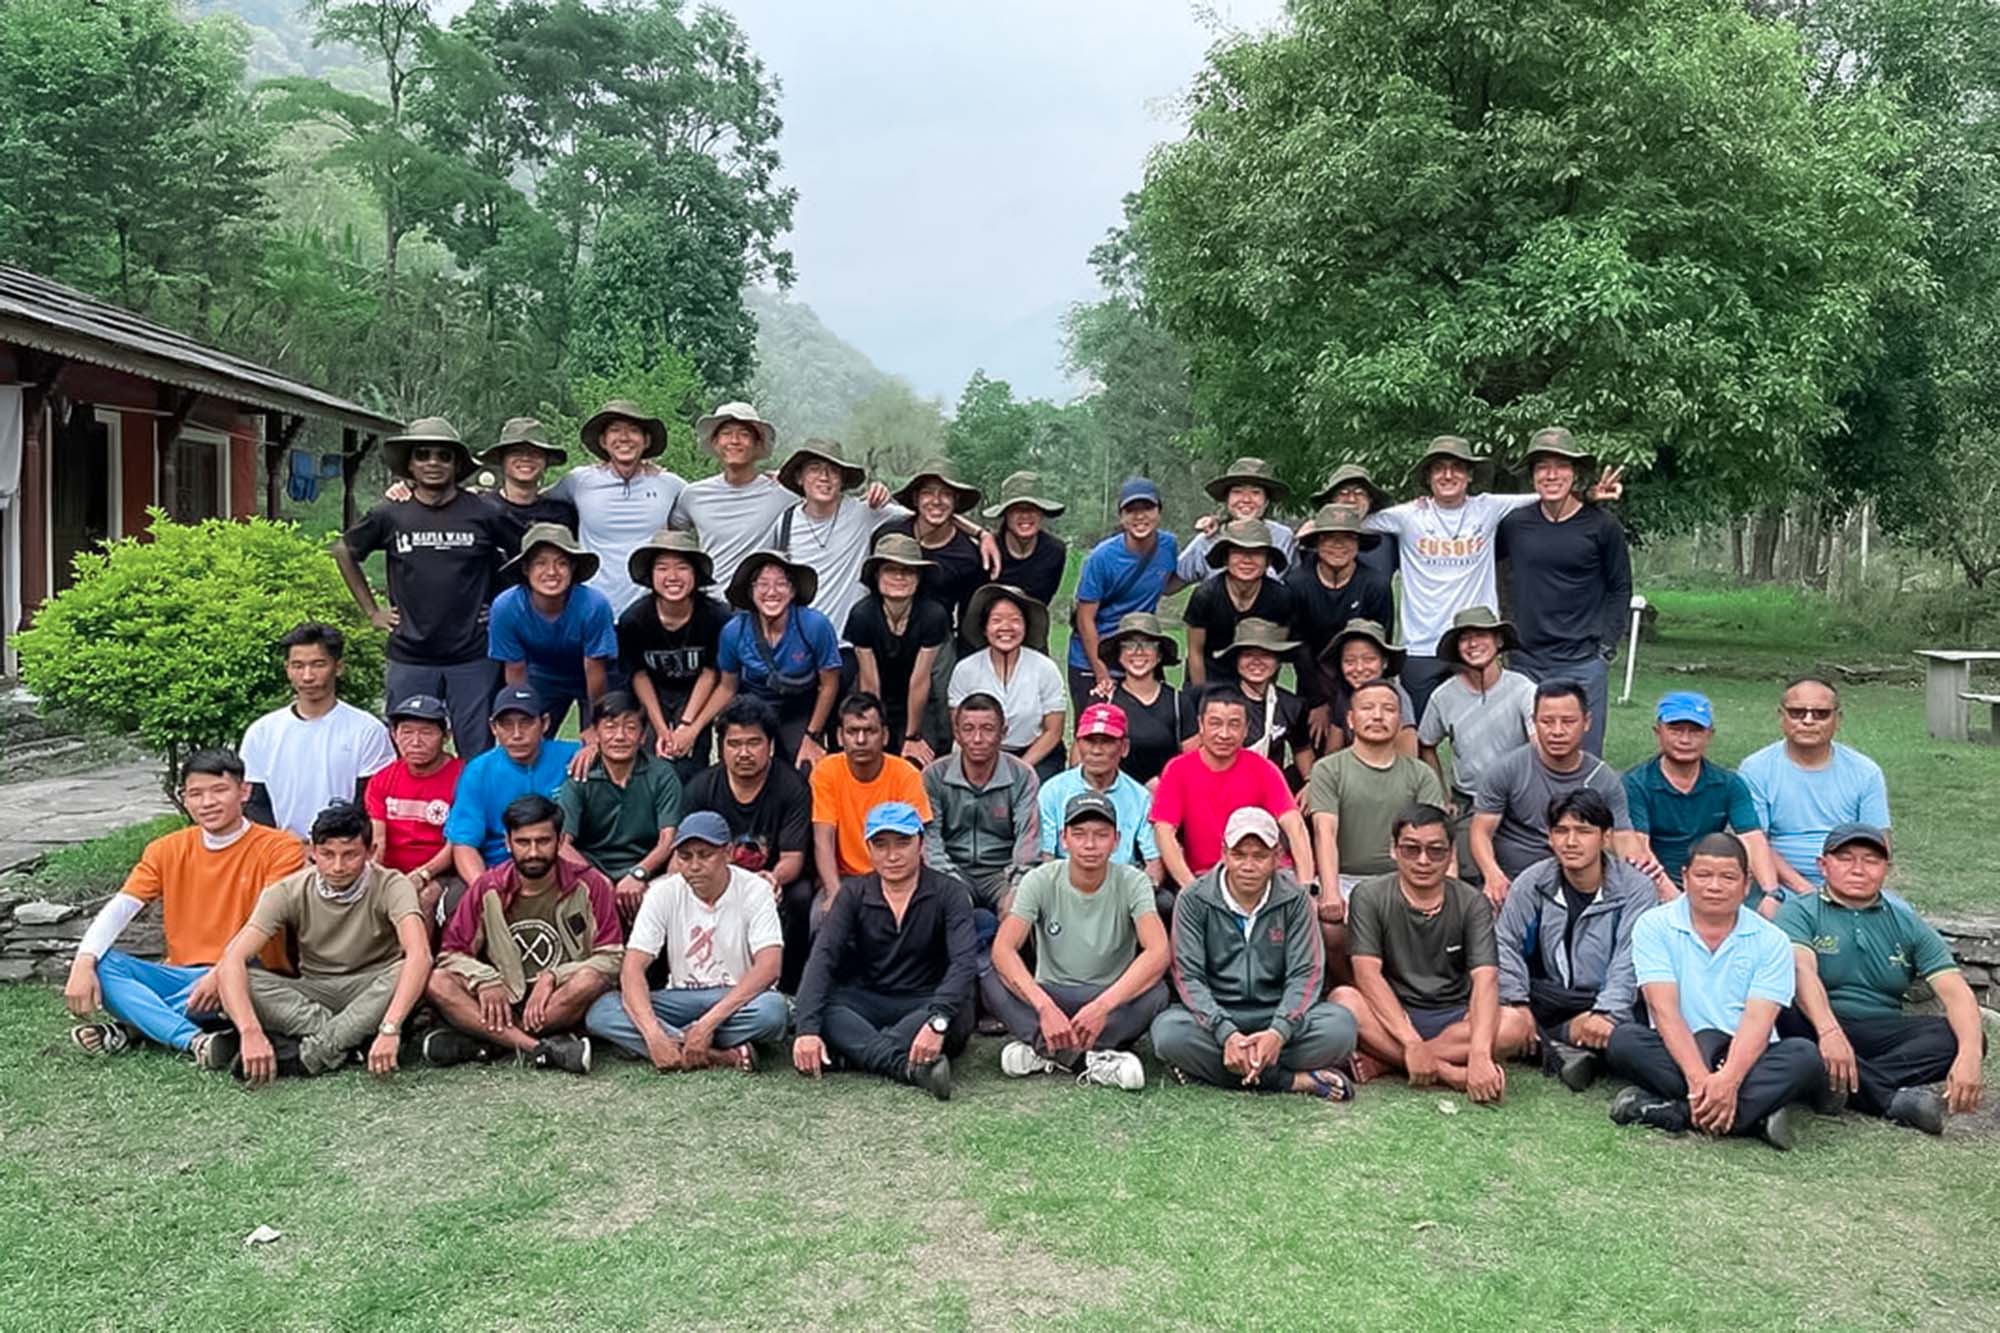 The company of our guides, porters and other support staff during our trek made the trip truly unforgettable! PHOTO: ASP Warren Liow